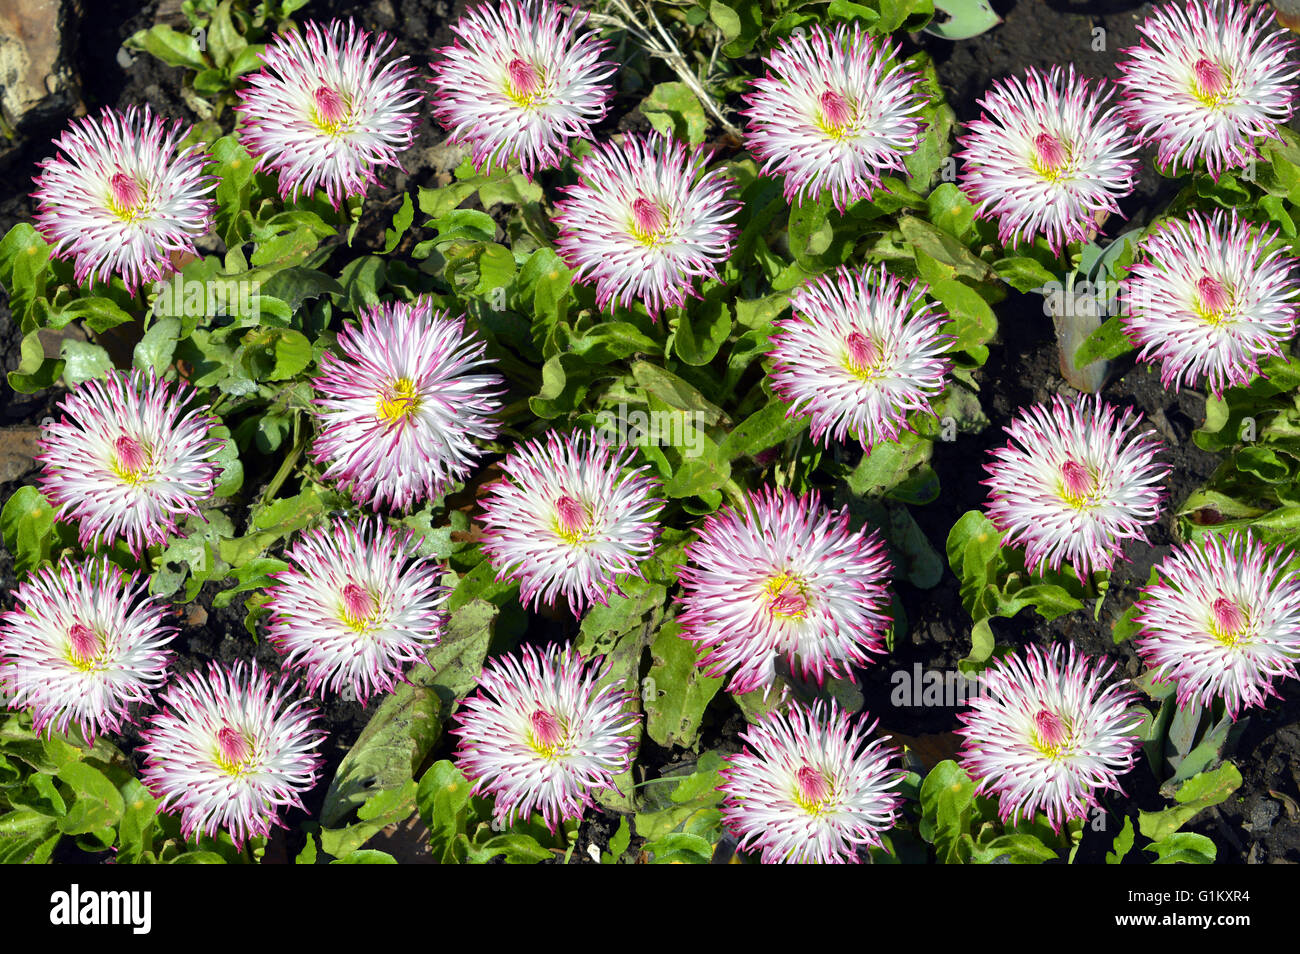 Bellis perennis Pomponette flowers in a flower bed Stock Photo